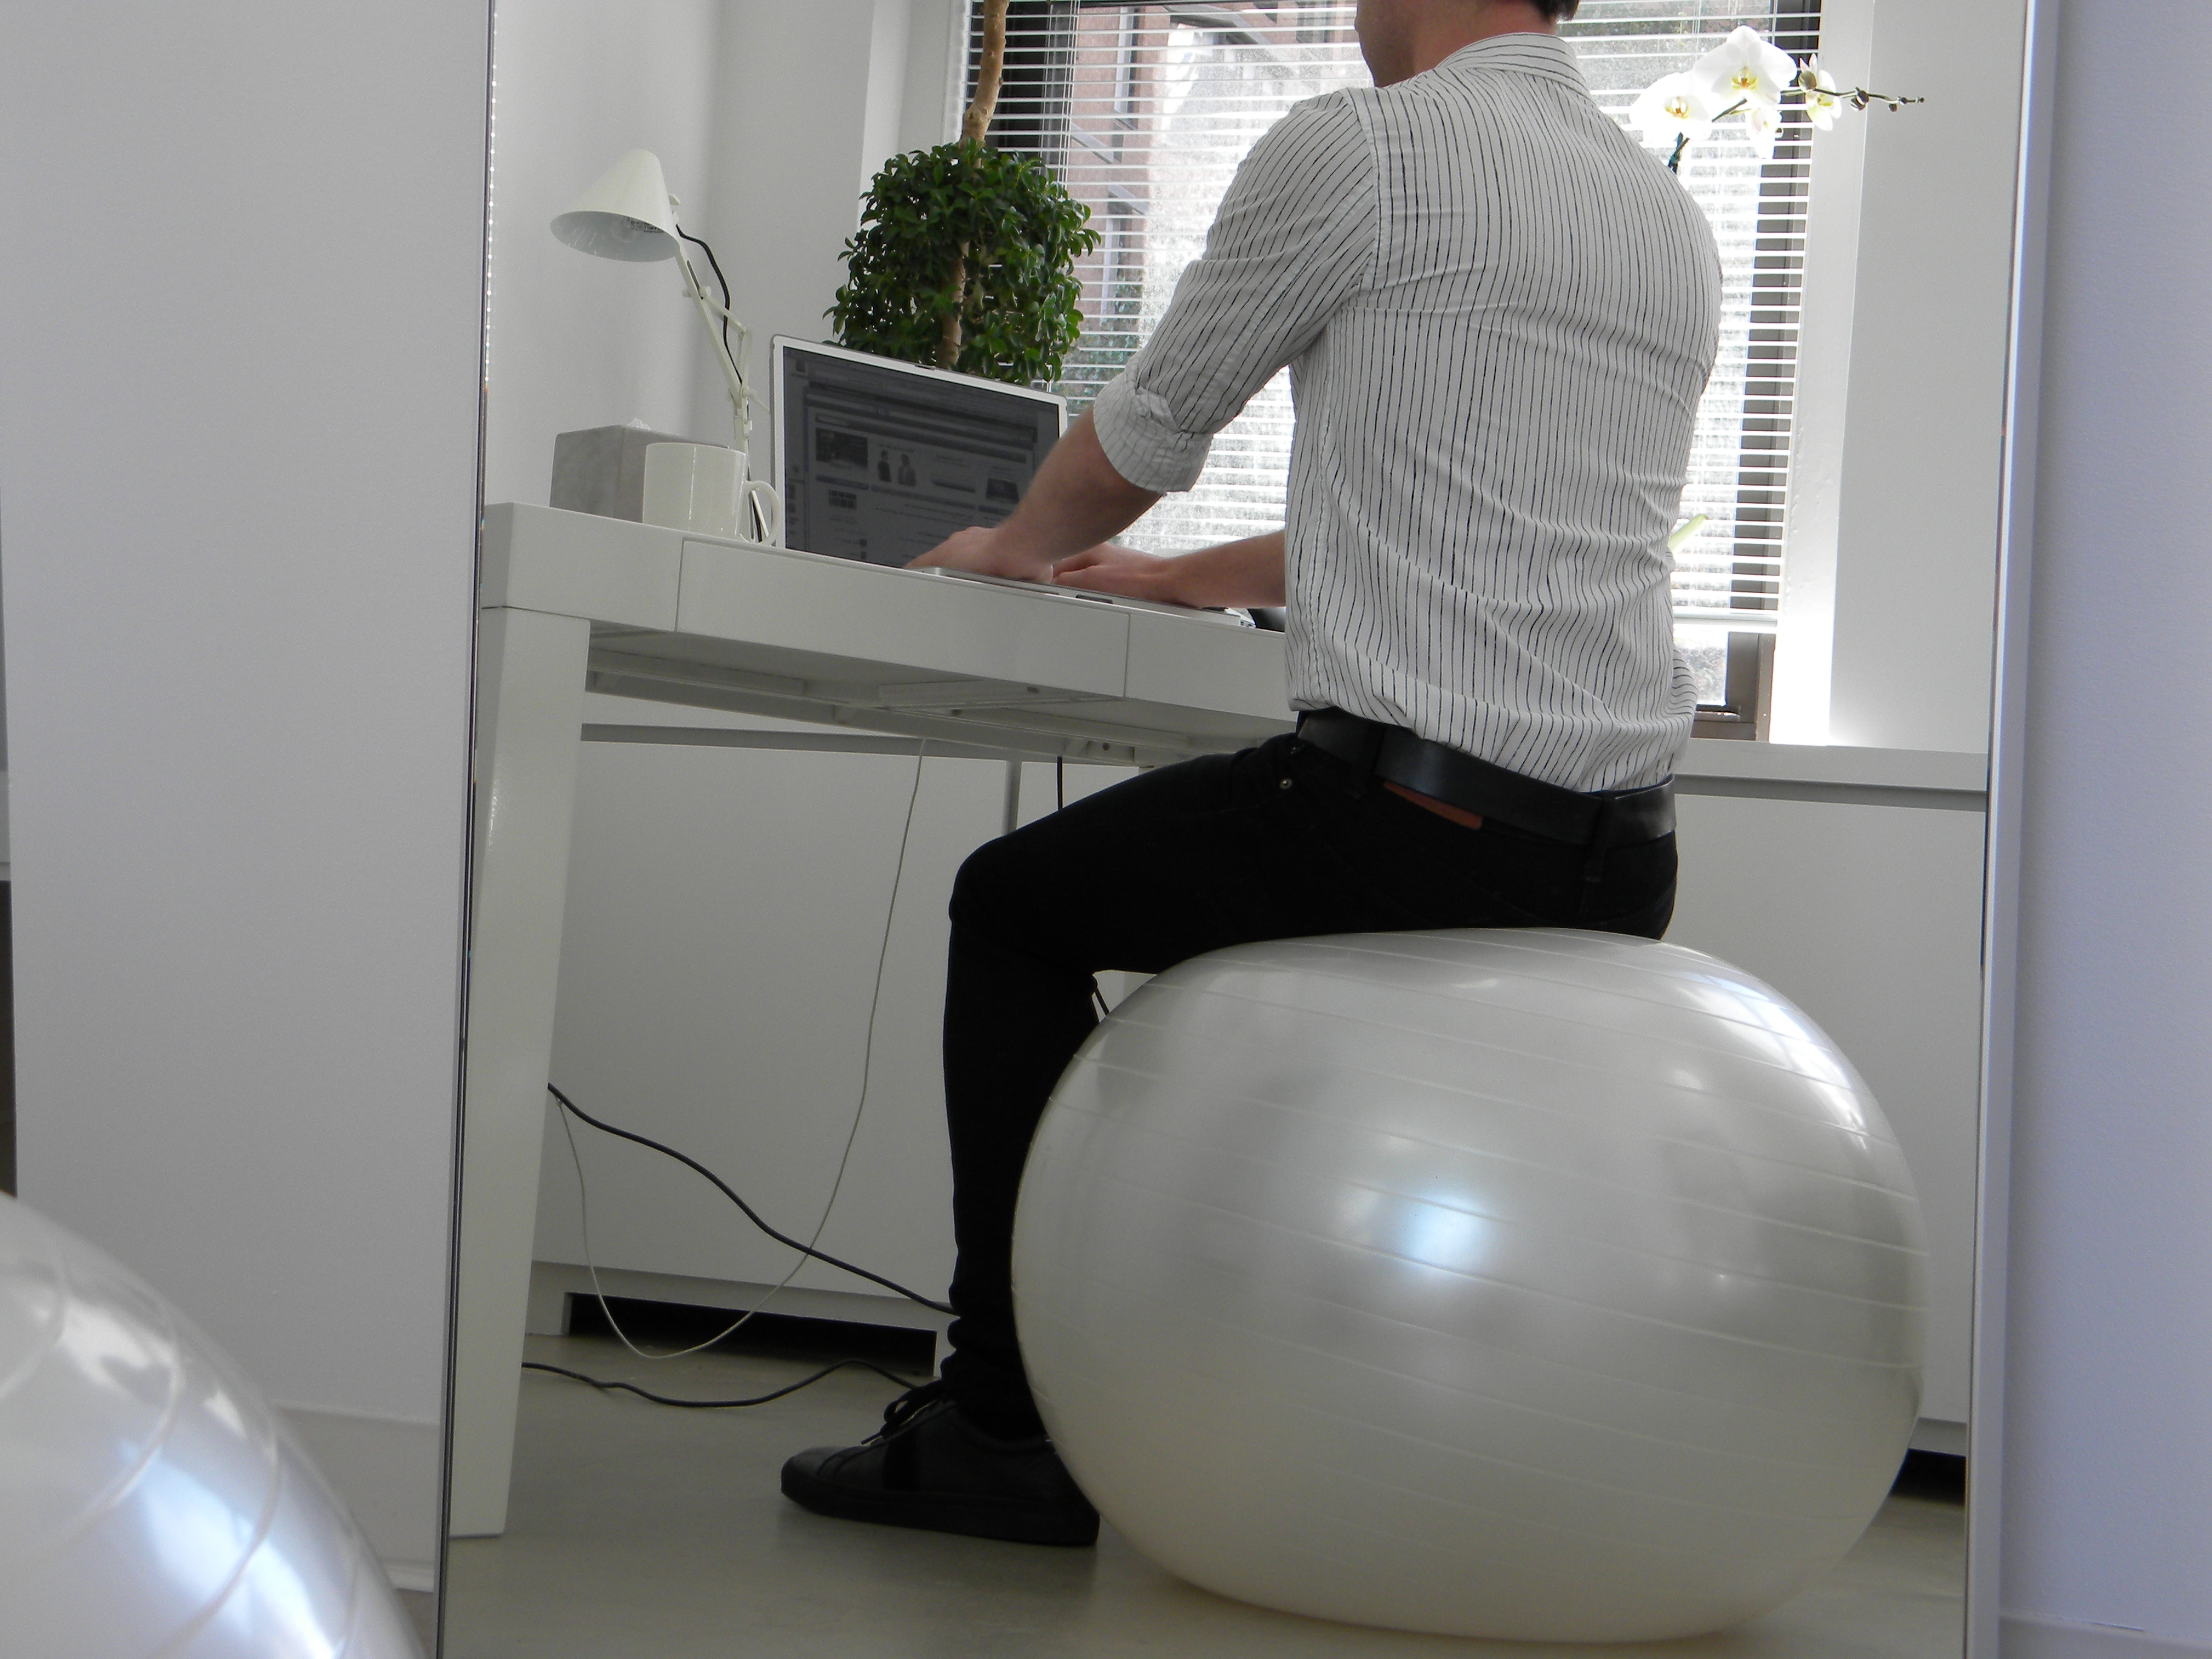 sitting on exercise ball at work